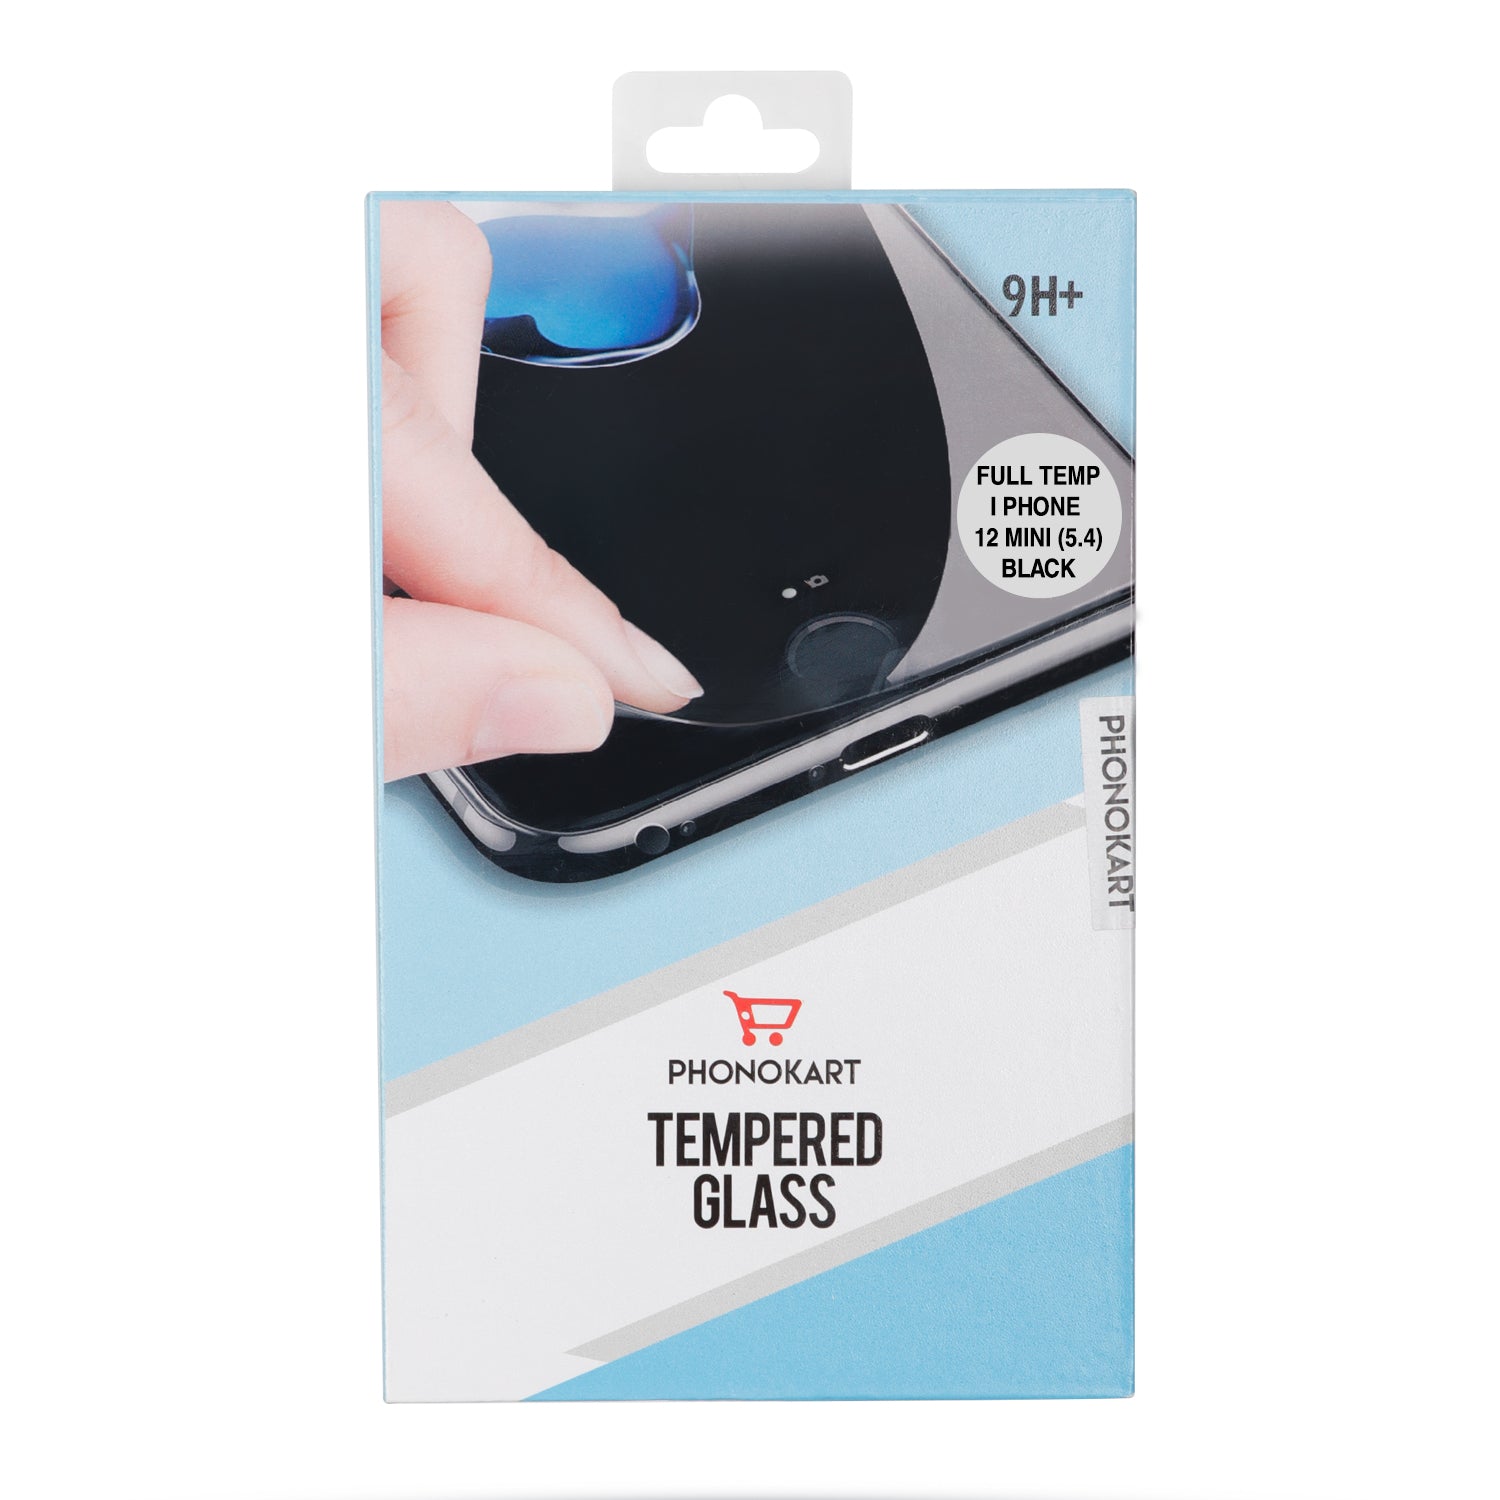 Full Tempered Glass for IPHONE 12 MINI